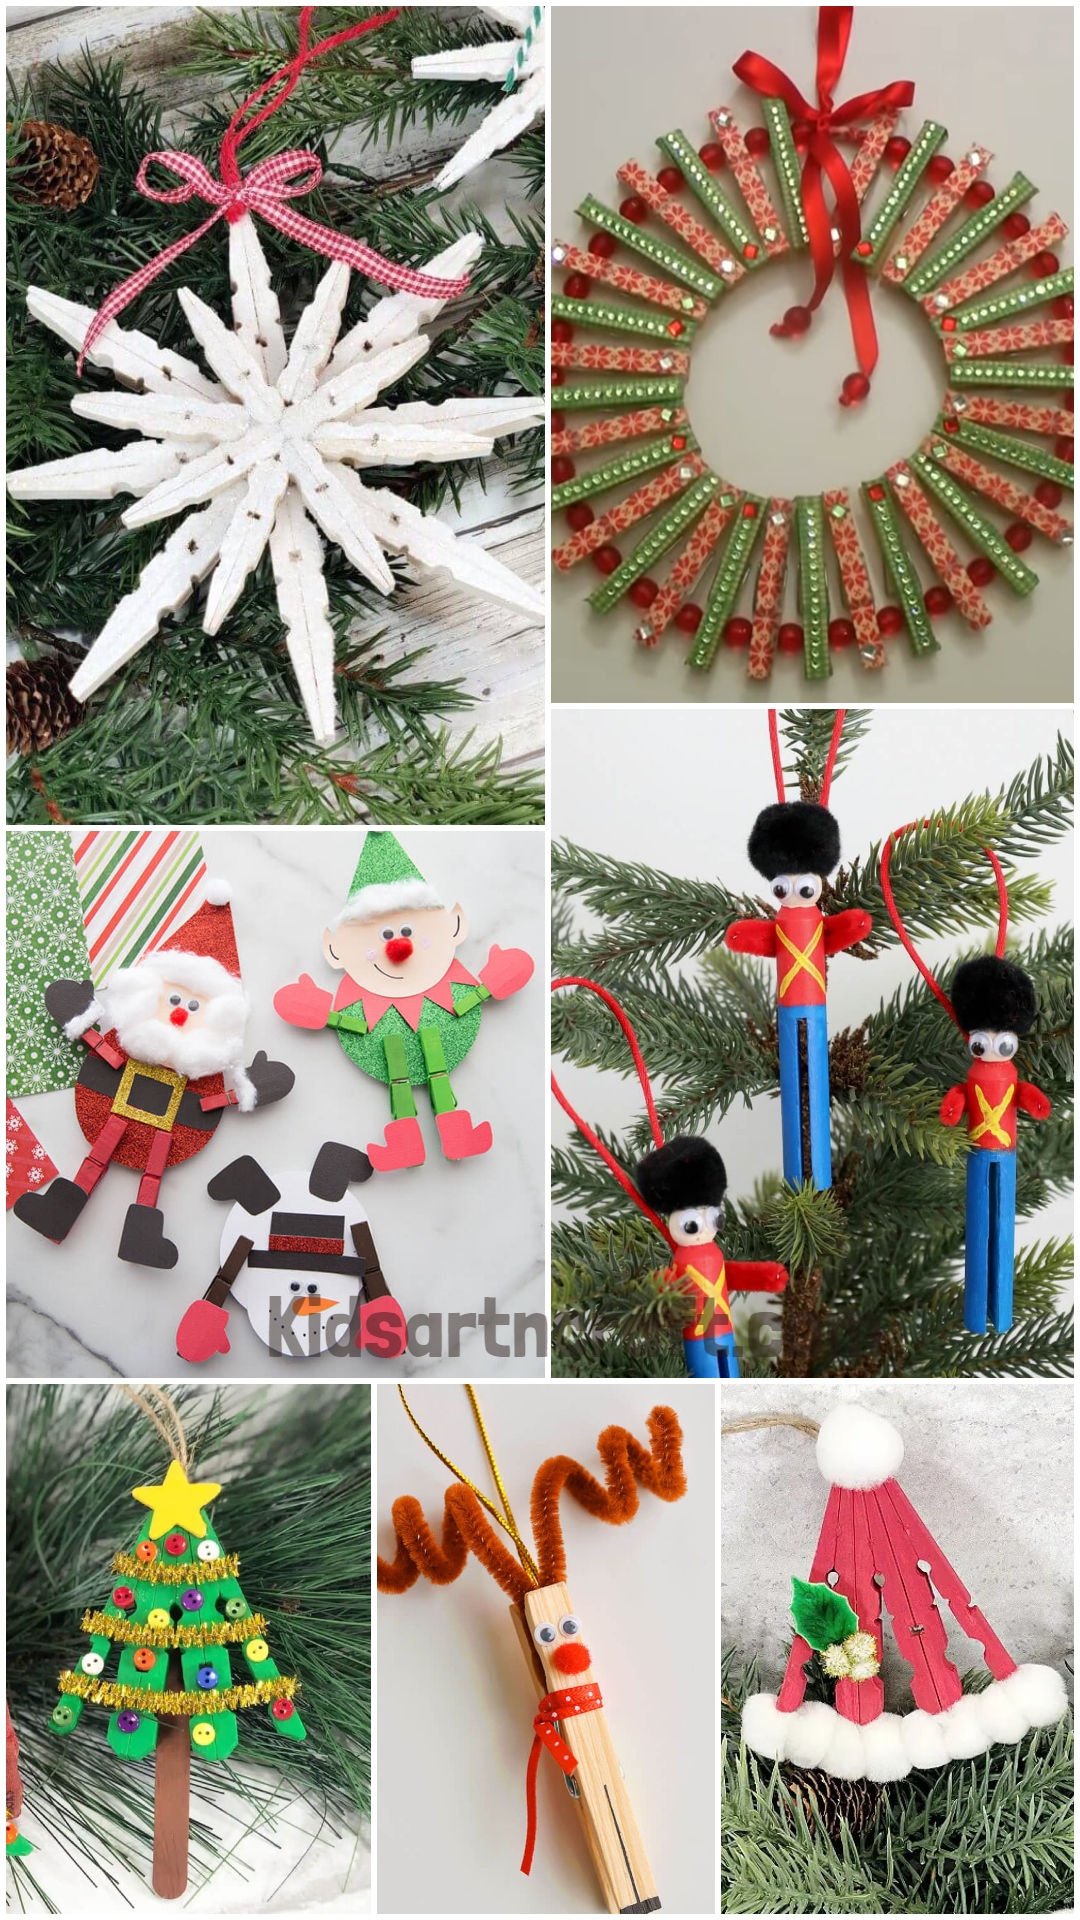 Clothespin Christmas crafts